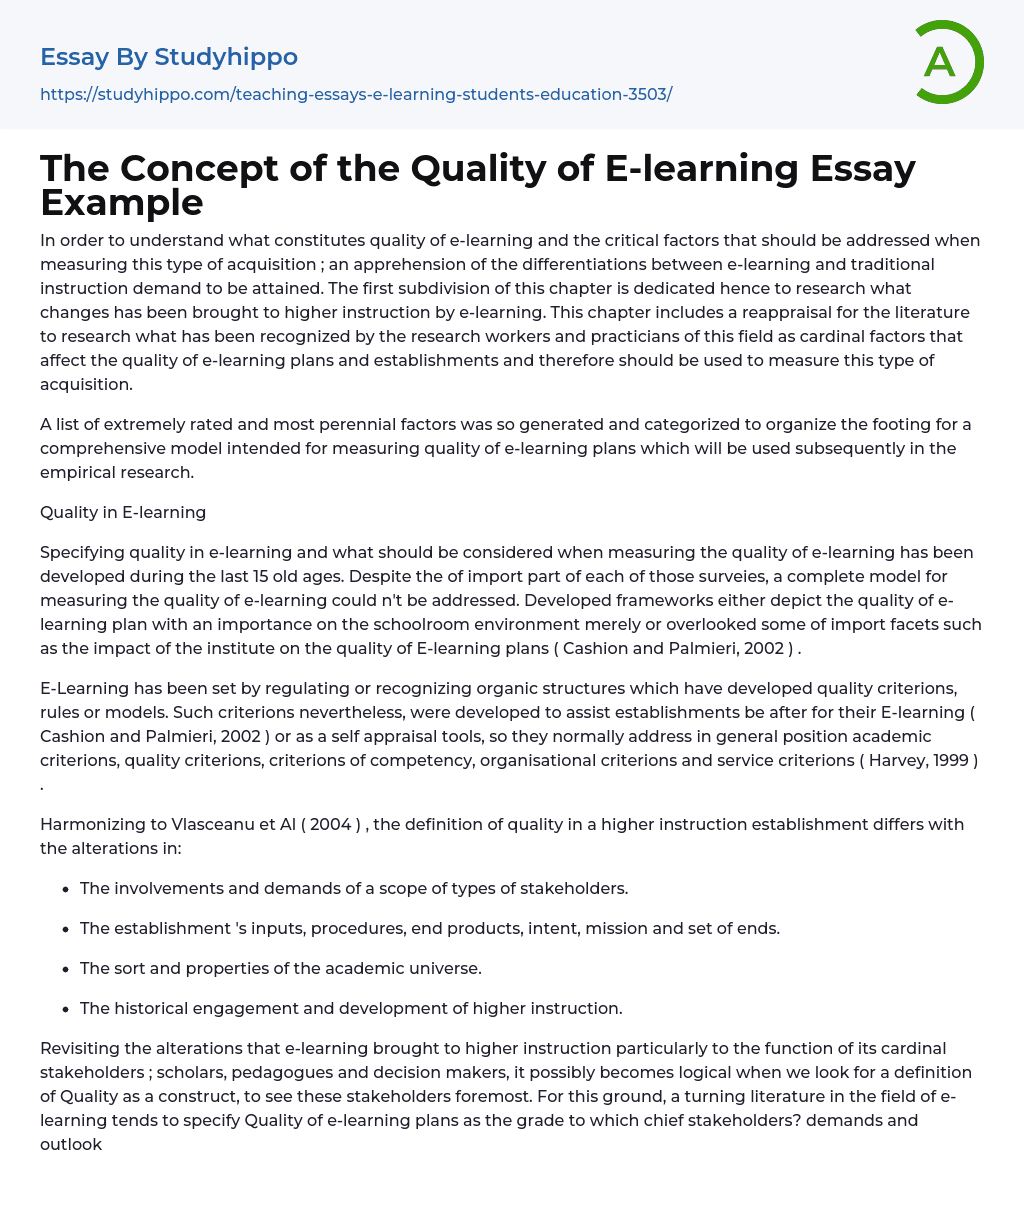 The Concept of the Quality of E-learning Essay Example